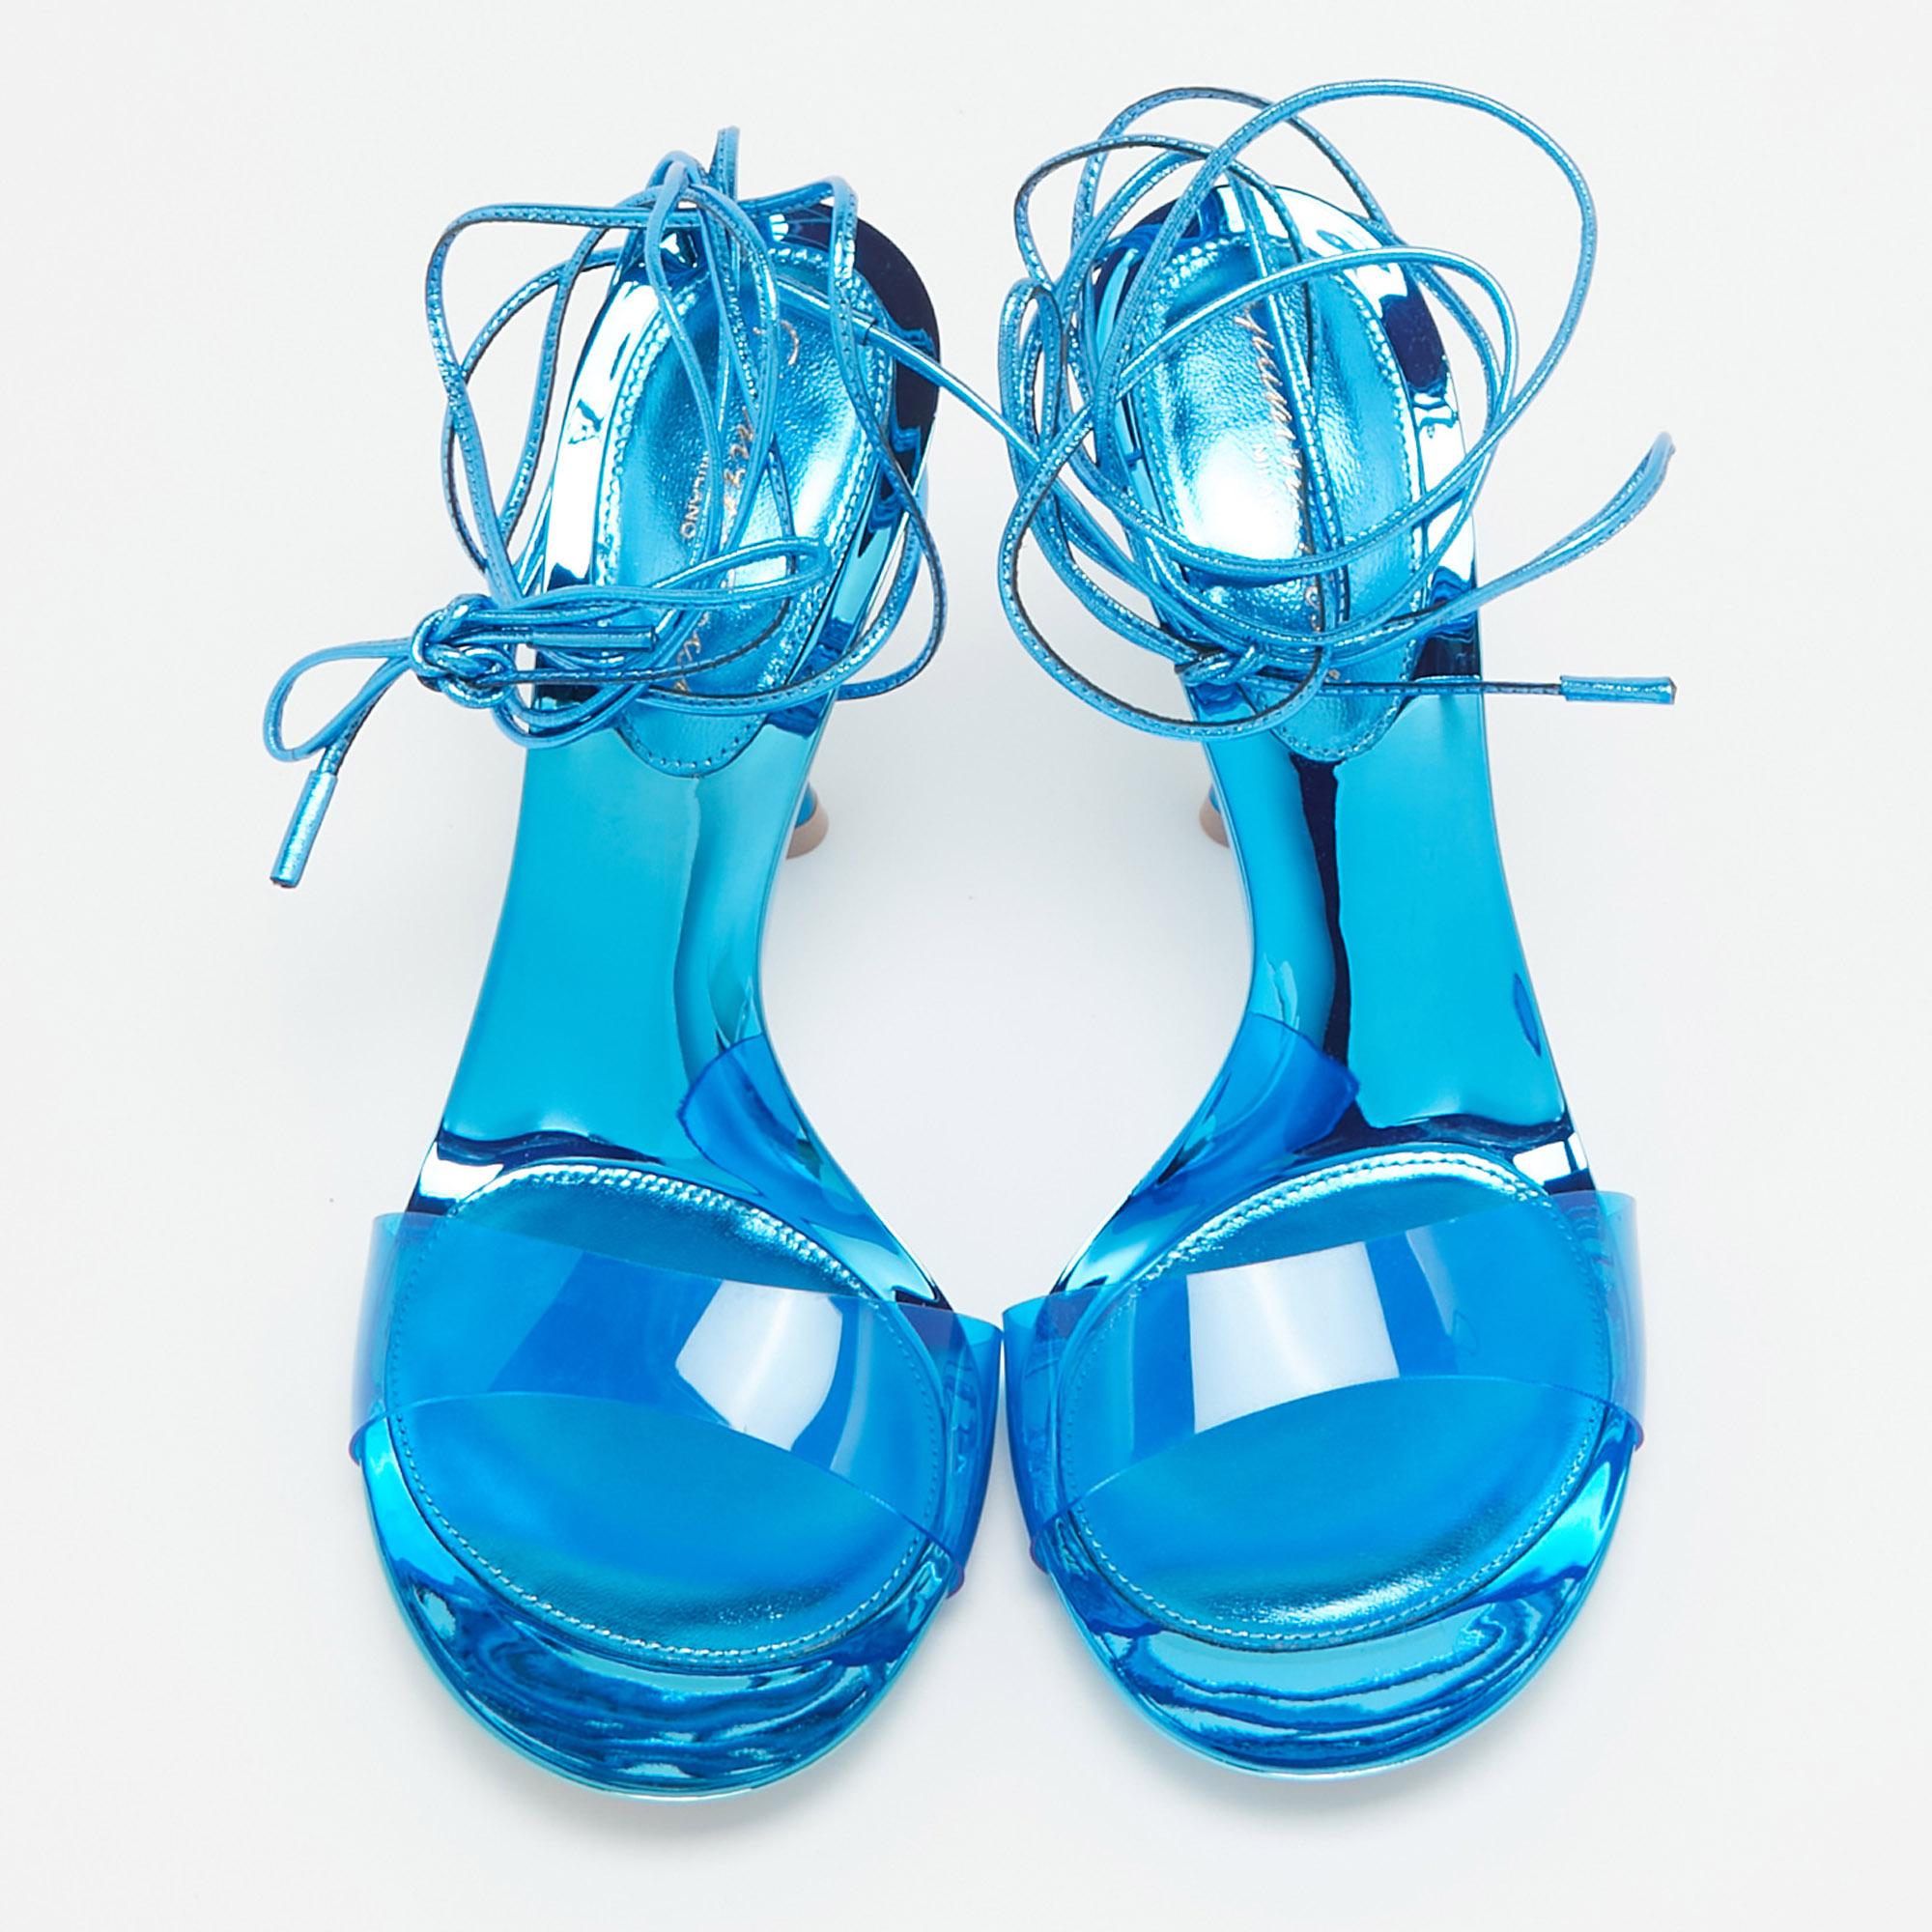 Indulge in luxury with Gianvito Rossi's Spice ankle tie Sandals. Crafted with meticulous attention to detail, these sandals boast a captivating blend of blue PVC and supple leather, culminating in a sophisticated ankle tie design that exudes